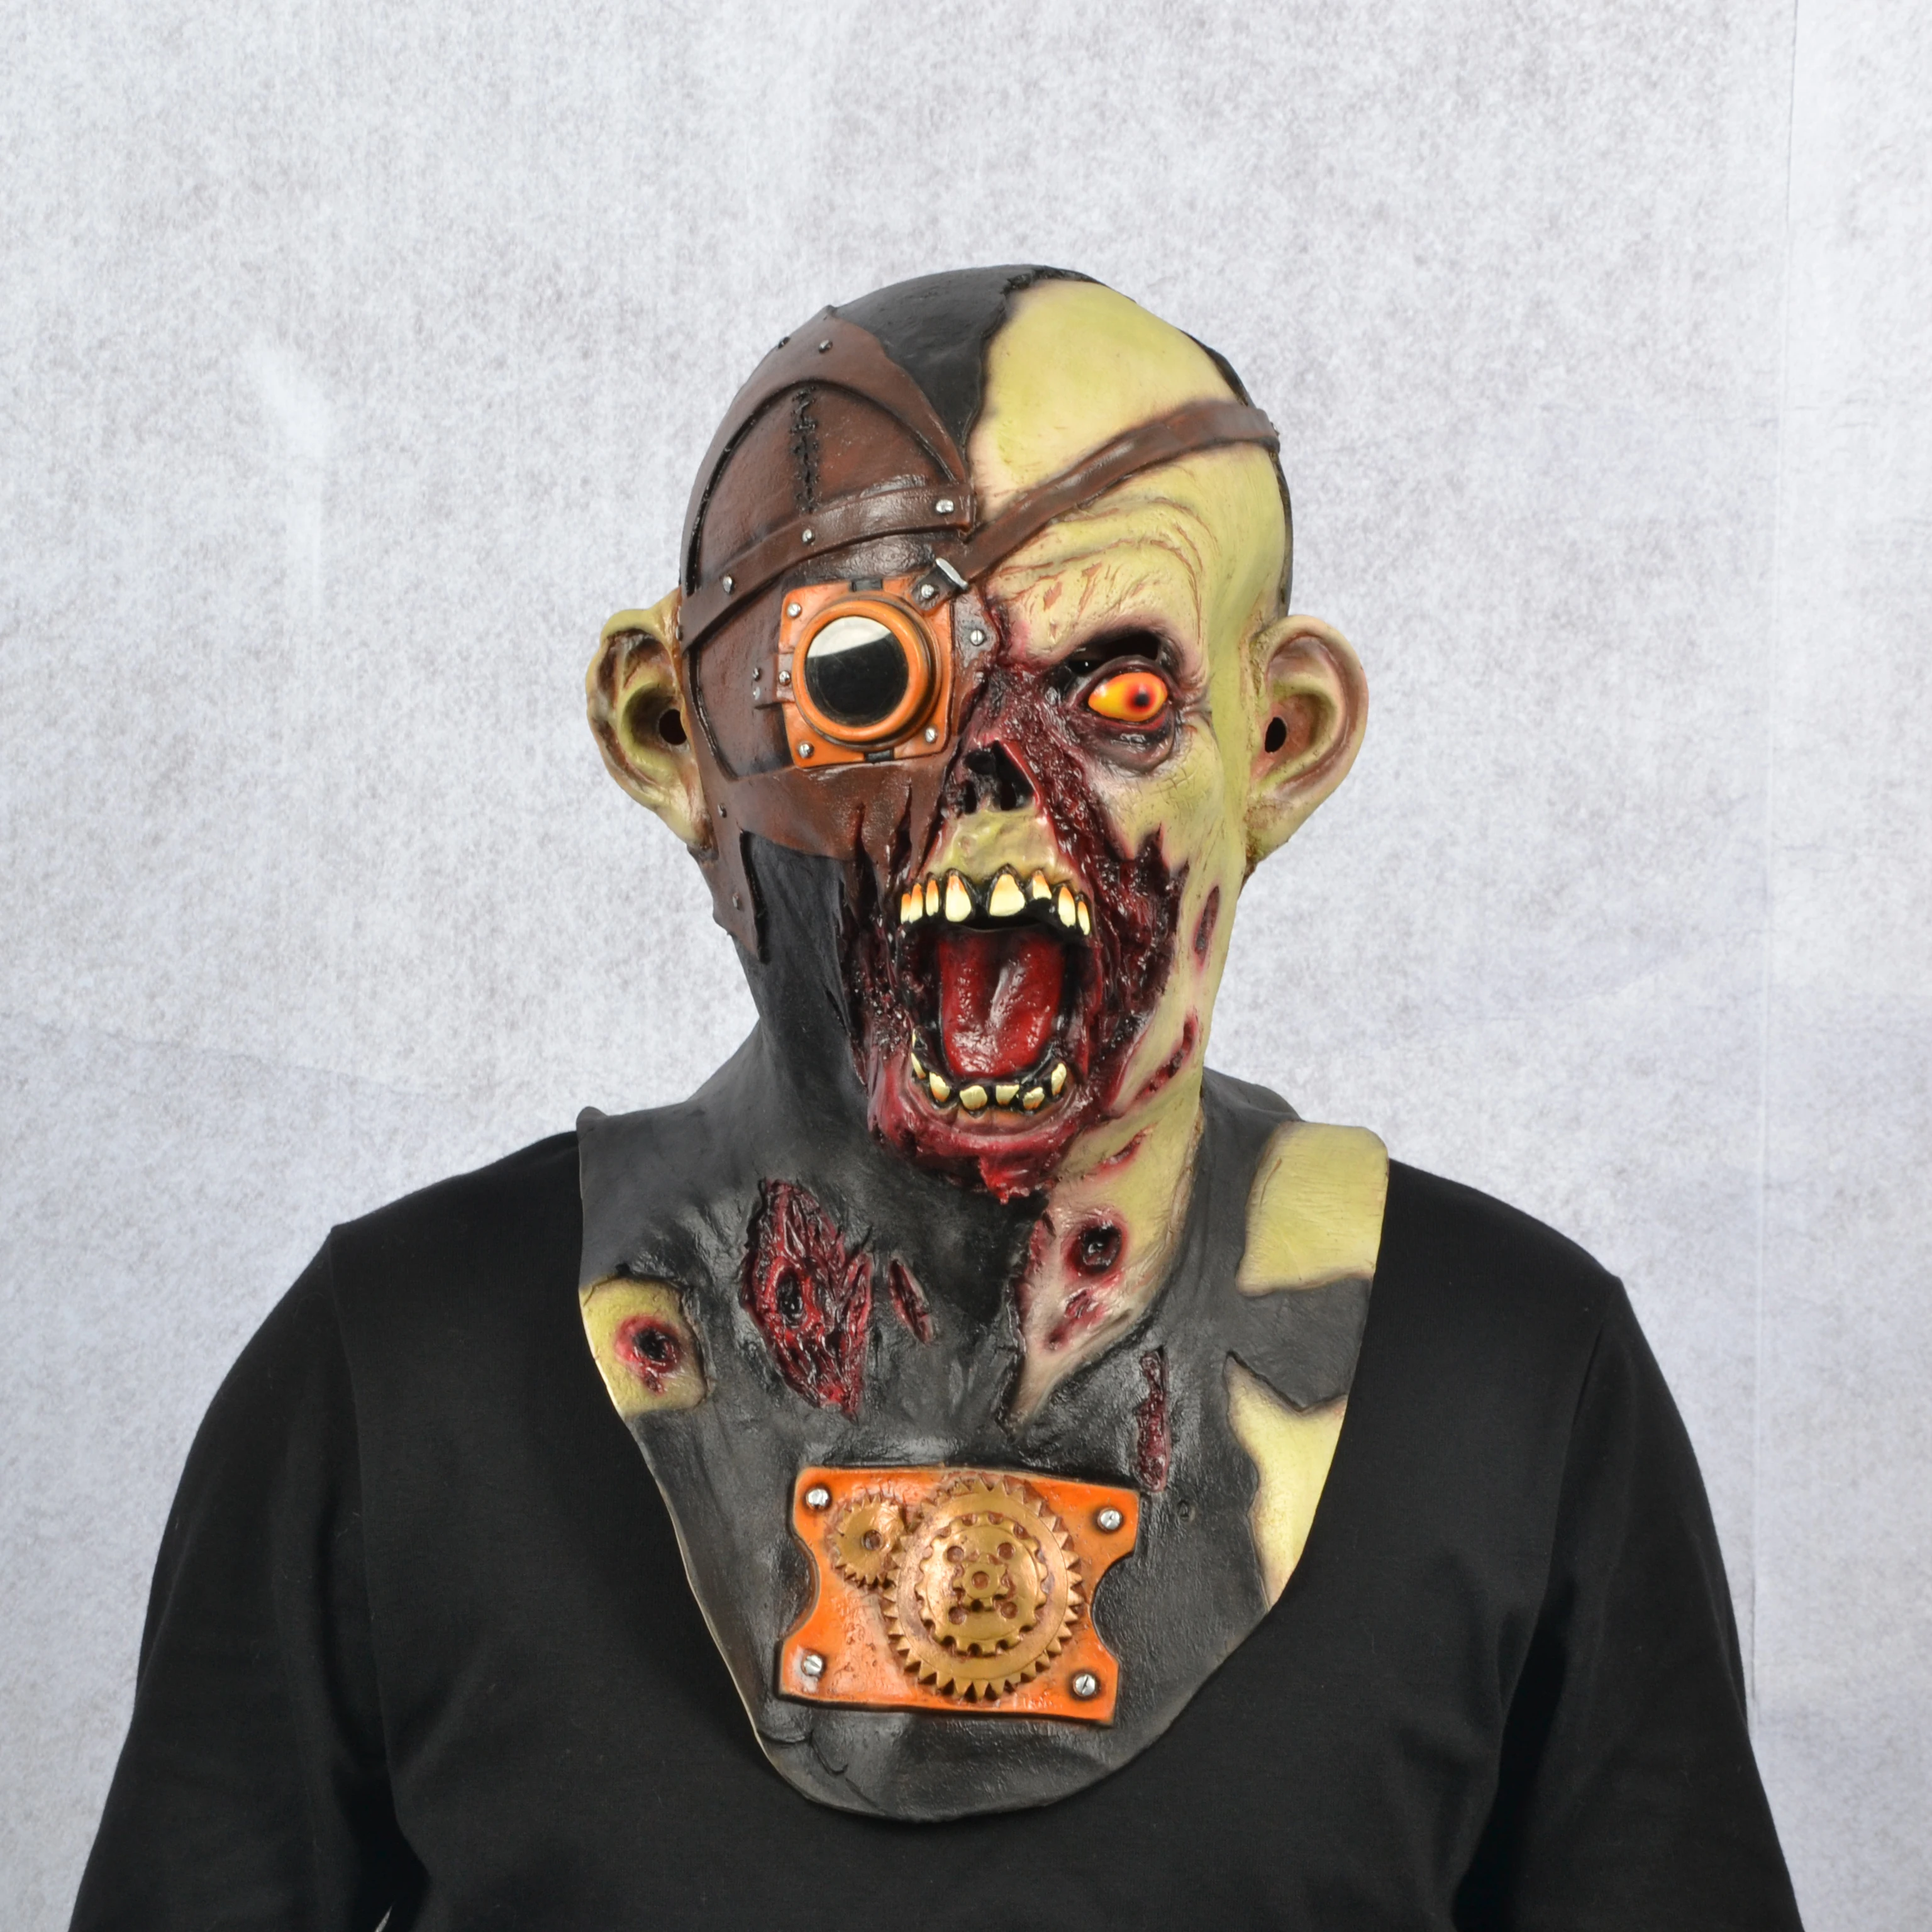 Novelty Realistic Cosplay High Quality Horror Halloween Scary Custom Latex Party Masks For Fun